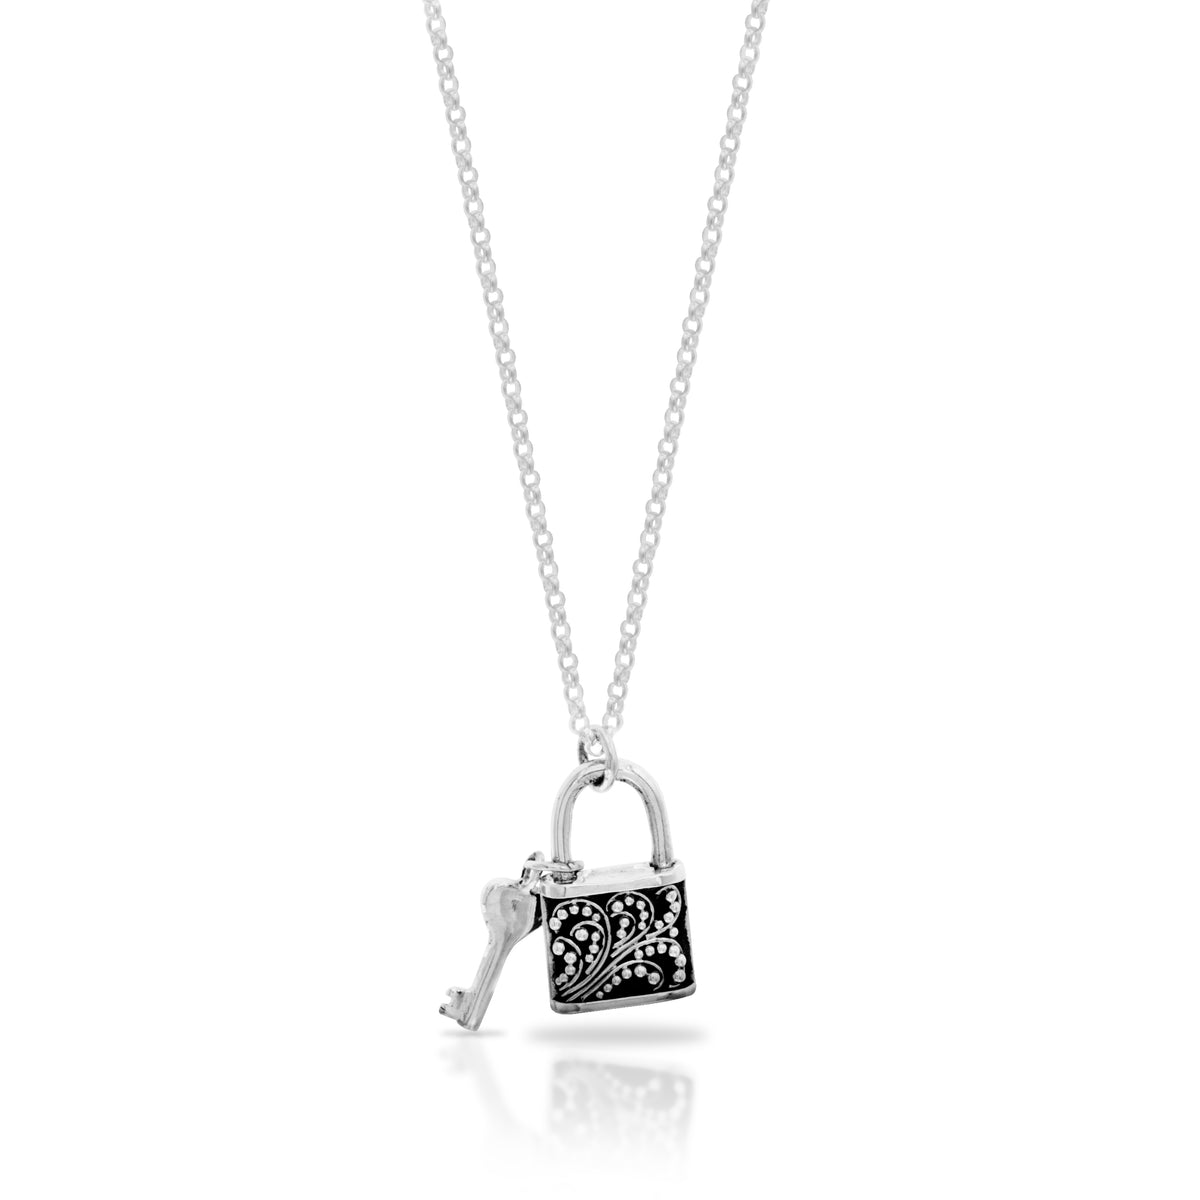 Classic Granulated Padlock with Key Pendant Necklace. Pendant 17mm x 10mm